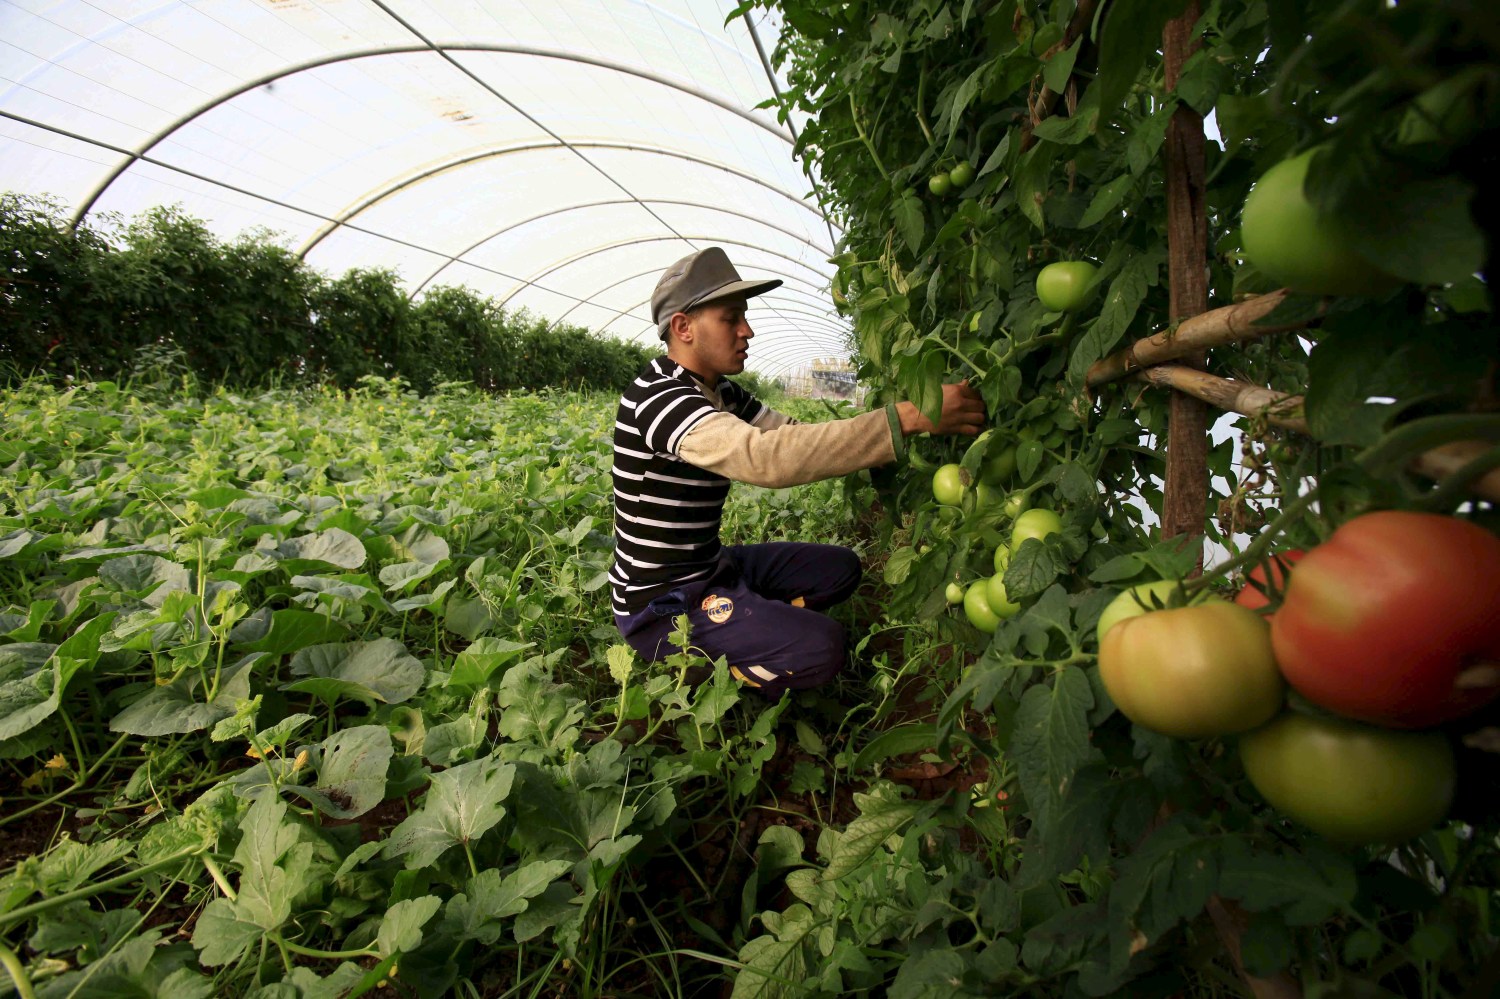 A farmer checks on his crop of tomatos in Tipaza, west of Algiers, Algeria June 3, 2015. Besides falling energy revenues, Algeria also has a growing number of mouths to feed, with the population put at 40 million and increasing by an estimated one million a year. Main foodstuffs, including cereals, sugar and milk are subsidised, but there is no such help for some products such as vegetables, which keeps prices high. Official statistics show the state imports on average five million tonnes of wheat and barley a year, but that figure appears to be climbing. It hit some 7.4 million in 2014. Algeria last year took its first steps towards opening up the farming sector to foreign investors, inviting bids for 16 state-owned farms focused on grains, vegetables, fruit trees and cattle breeding. Picture taken June 3, 2015.  To match story ALGERIA-AGRICULTURE/      REUTERS/Ramzi Boudina - GF10000120888